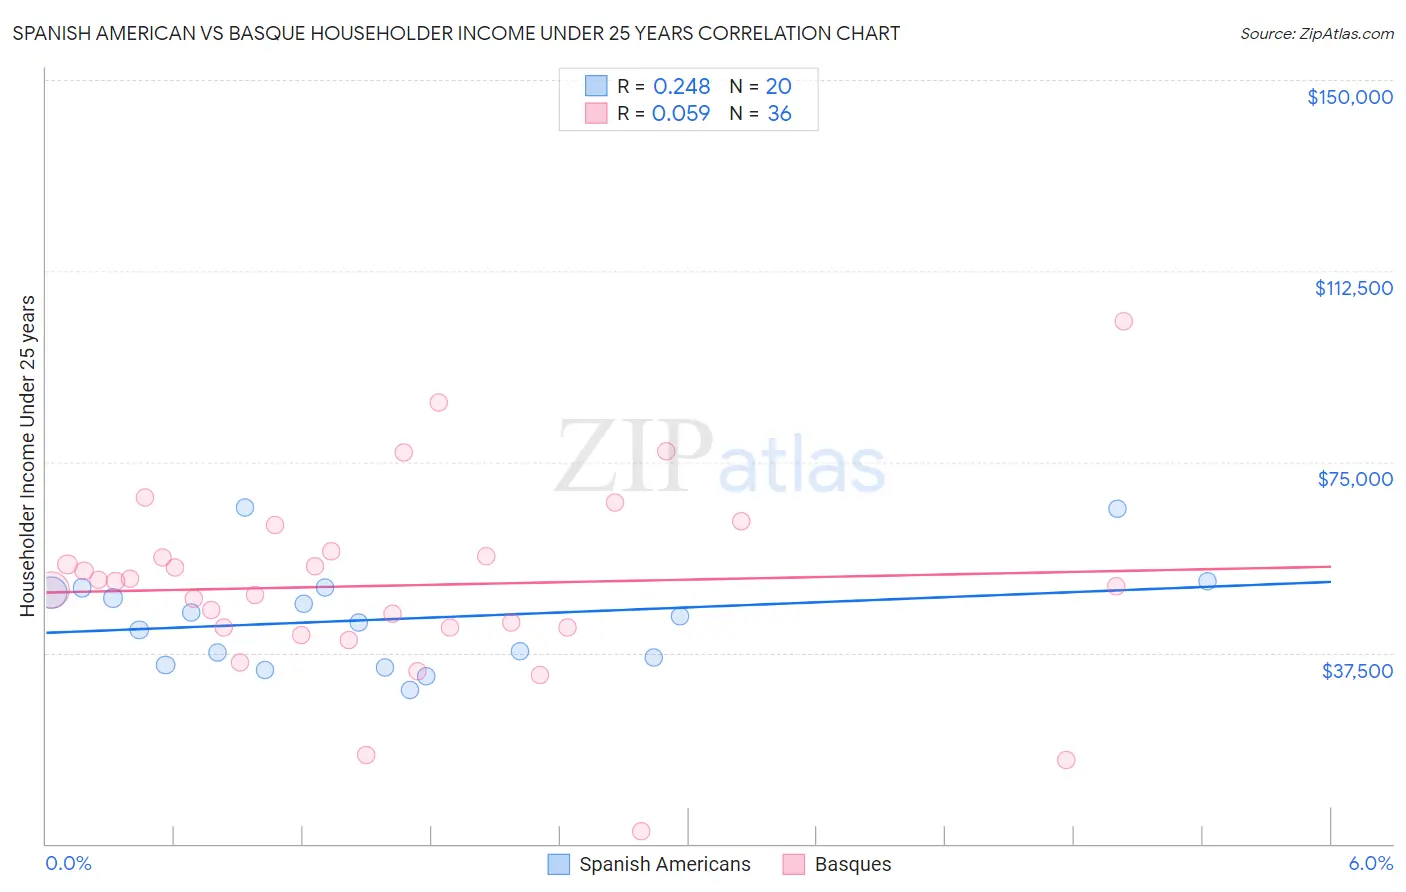 Spanish American vs Basque Householder Income Under 25 years